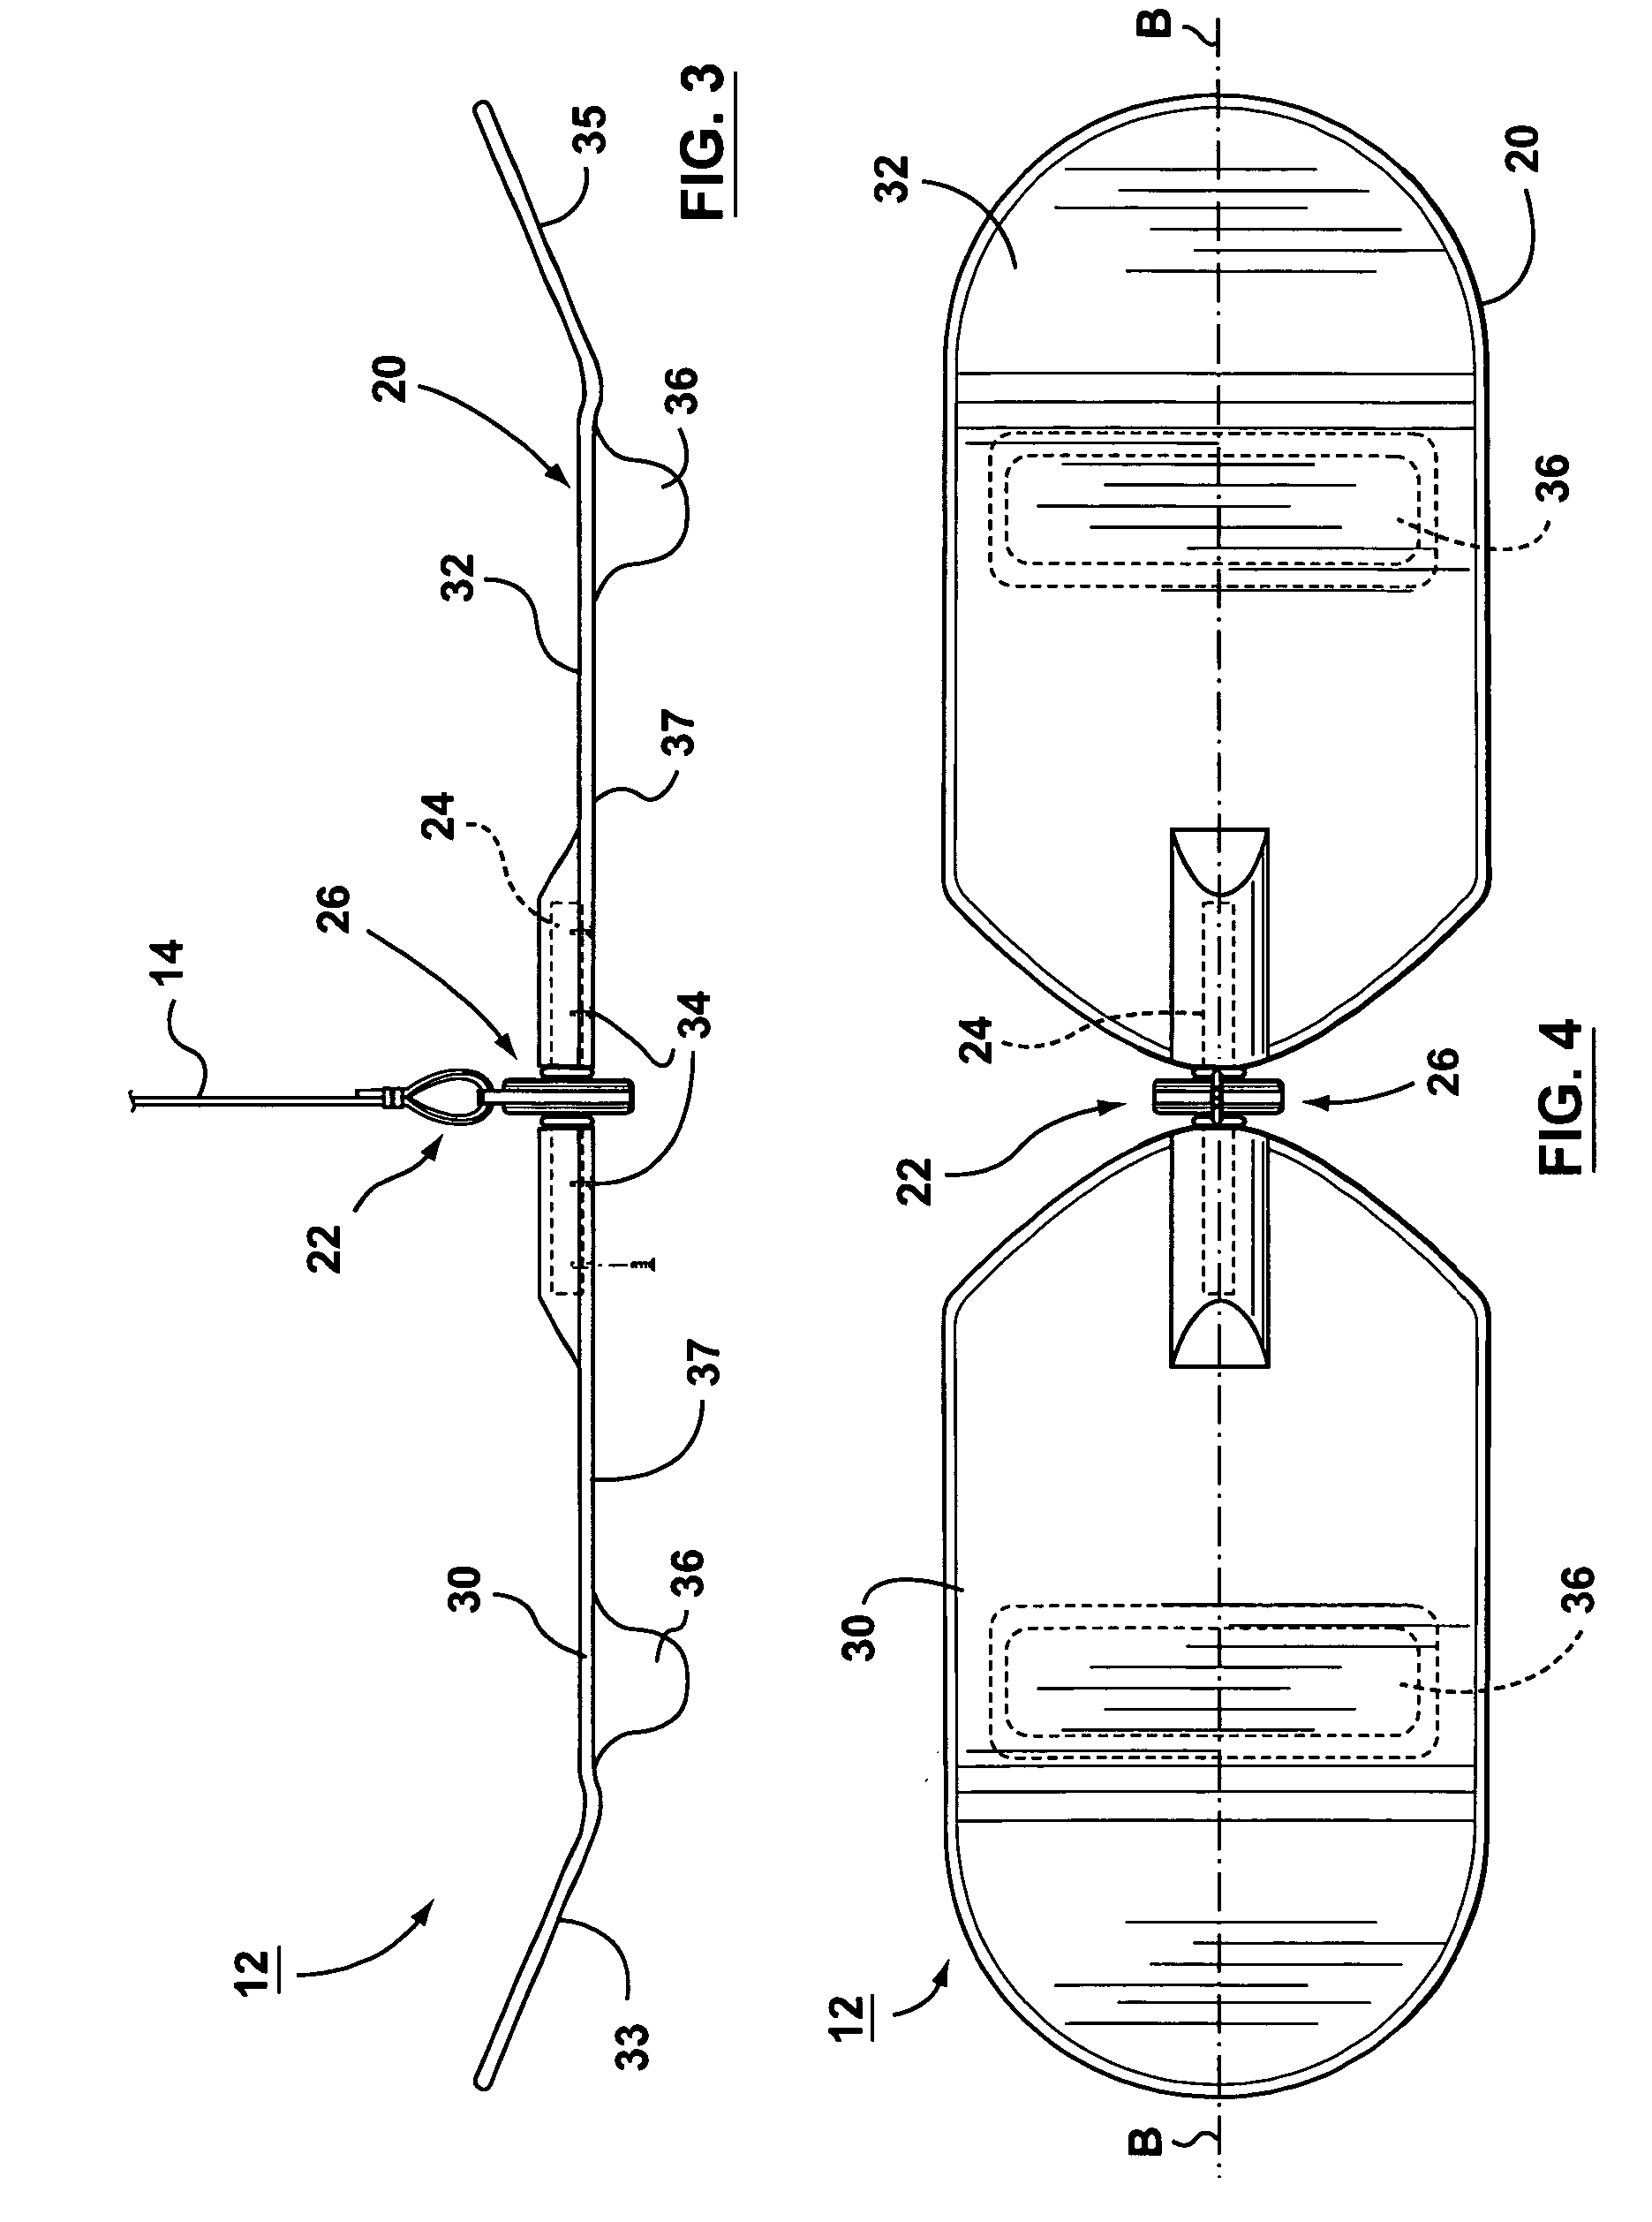 Apparatus for ropeboarding